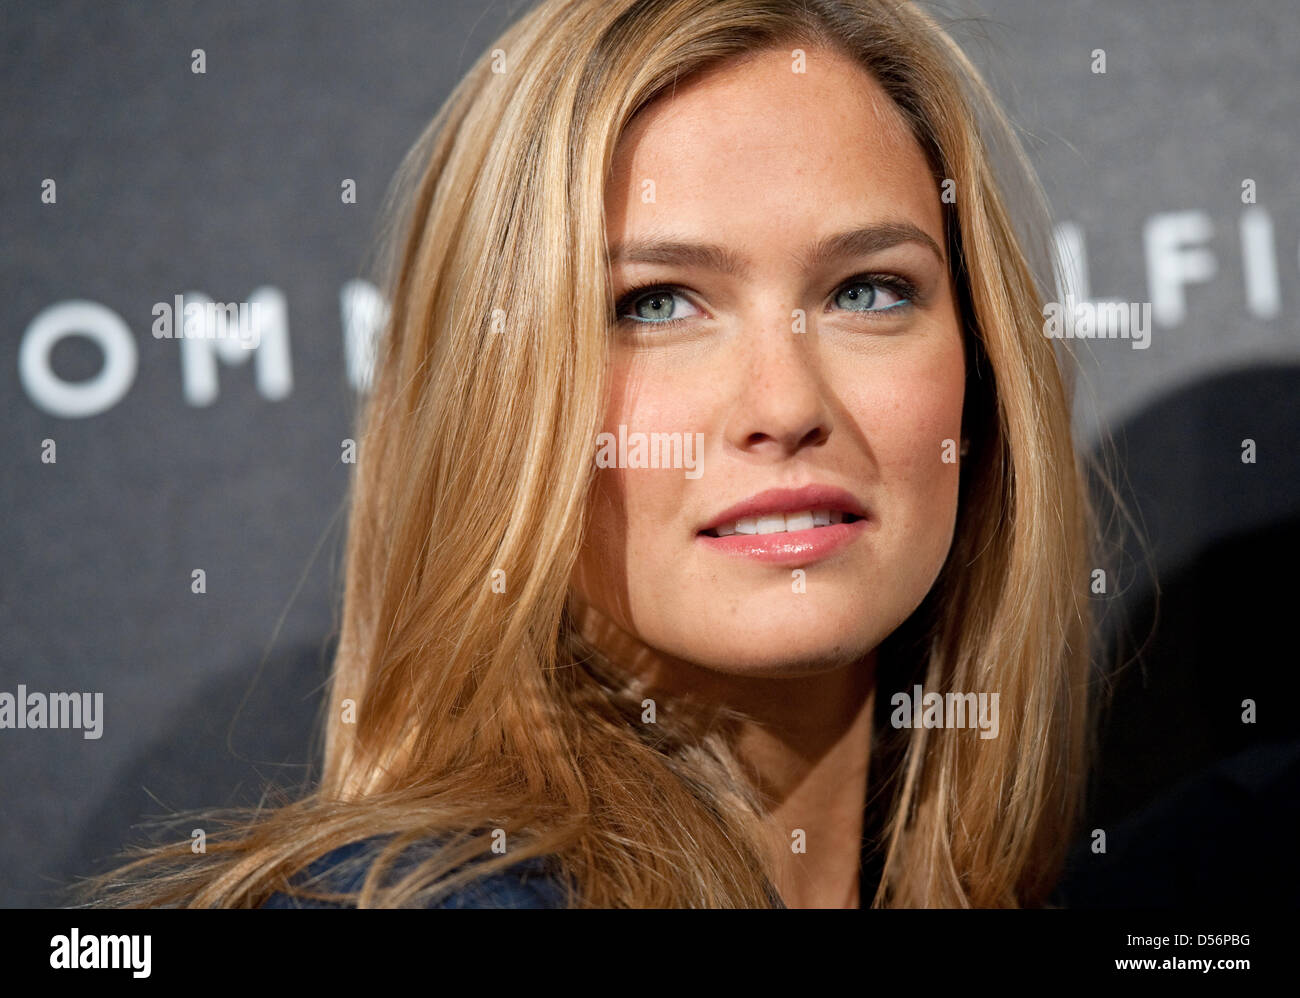 Israeli supermodel Bar Refaeli smiles for the photographers as she visits  the opening of a Tommy Hilfiger fashion store in Frankfurt Main, Germany,  18 March 2010. Before the 24 year-old had defended